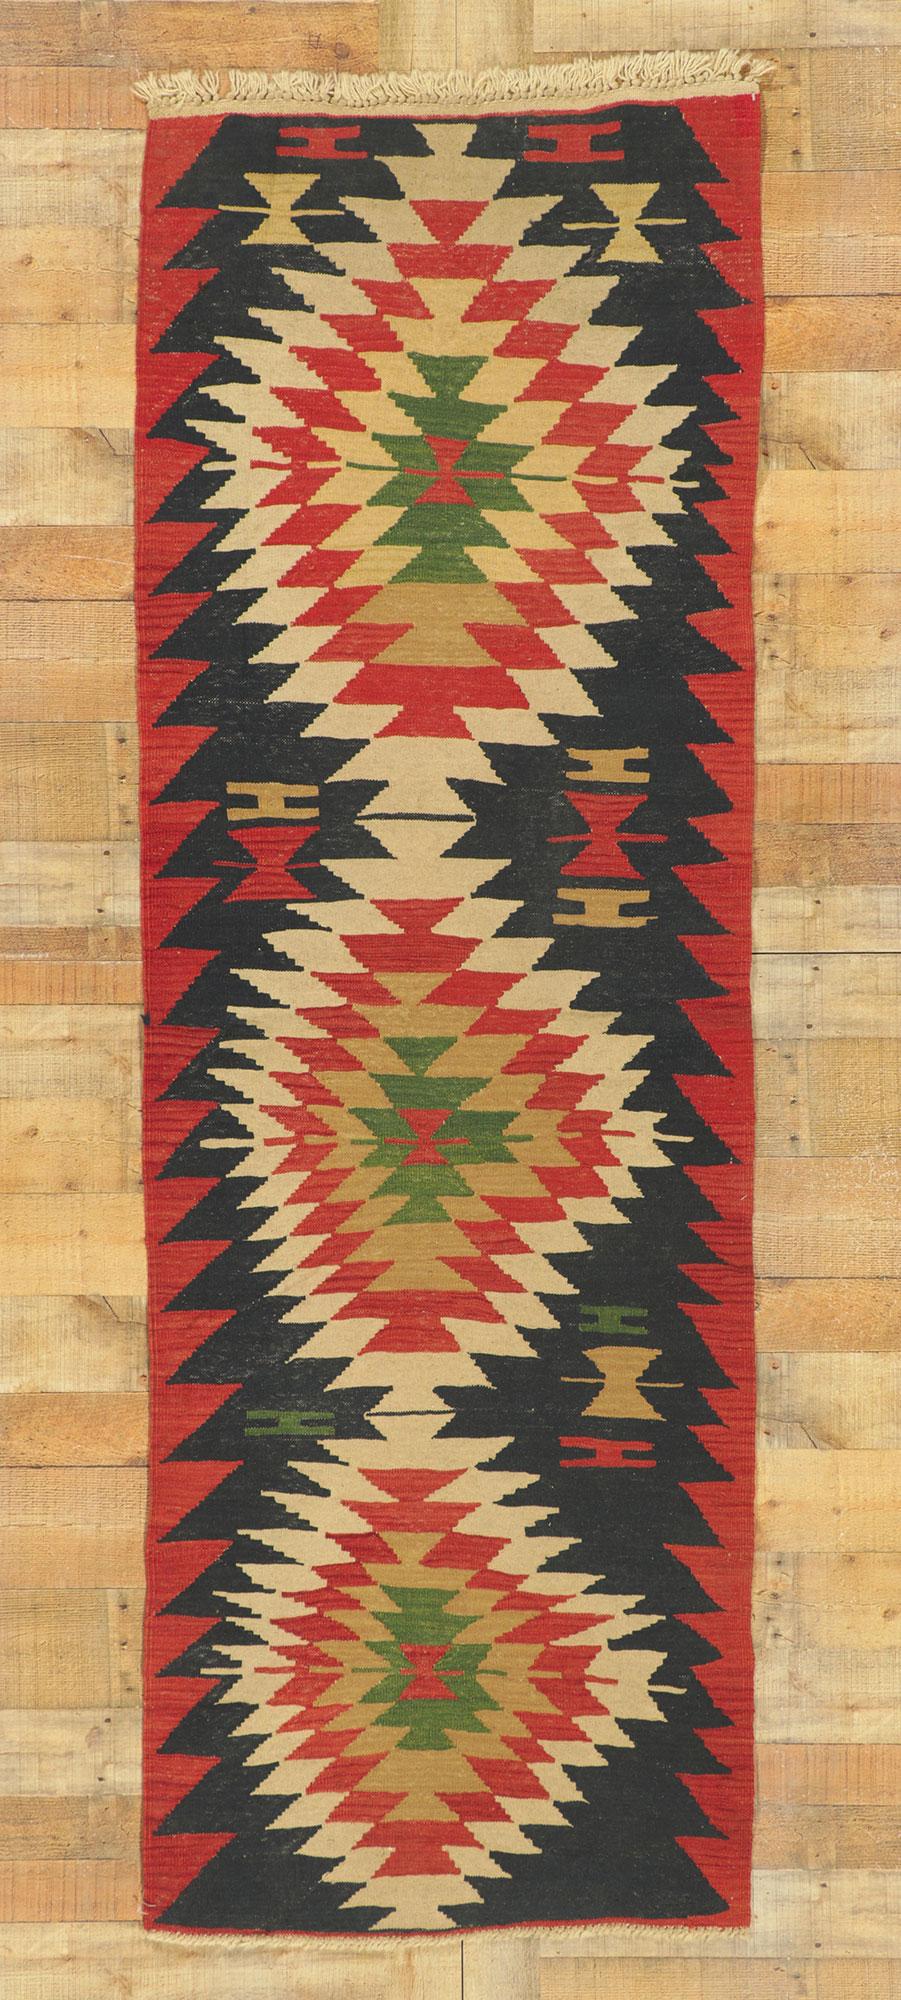 Vintage Shiraz Kilim Runner Rug, Wabi-Sabi Meets Southwest Style In Good Condition For Sale In Dallas, TX